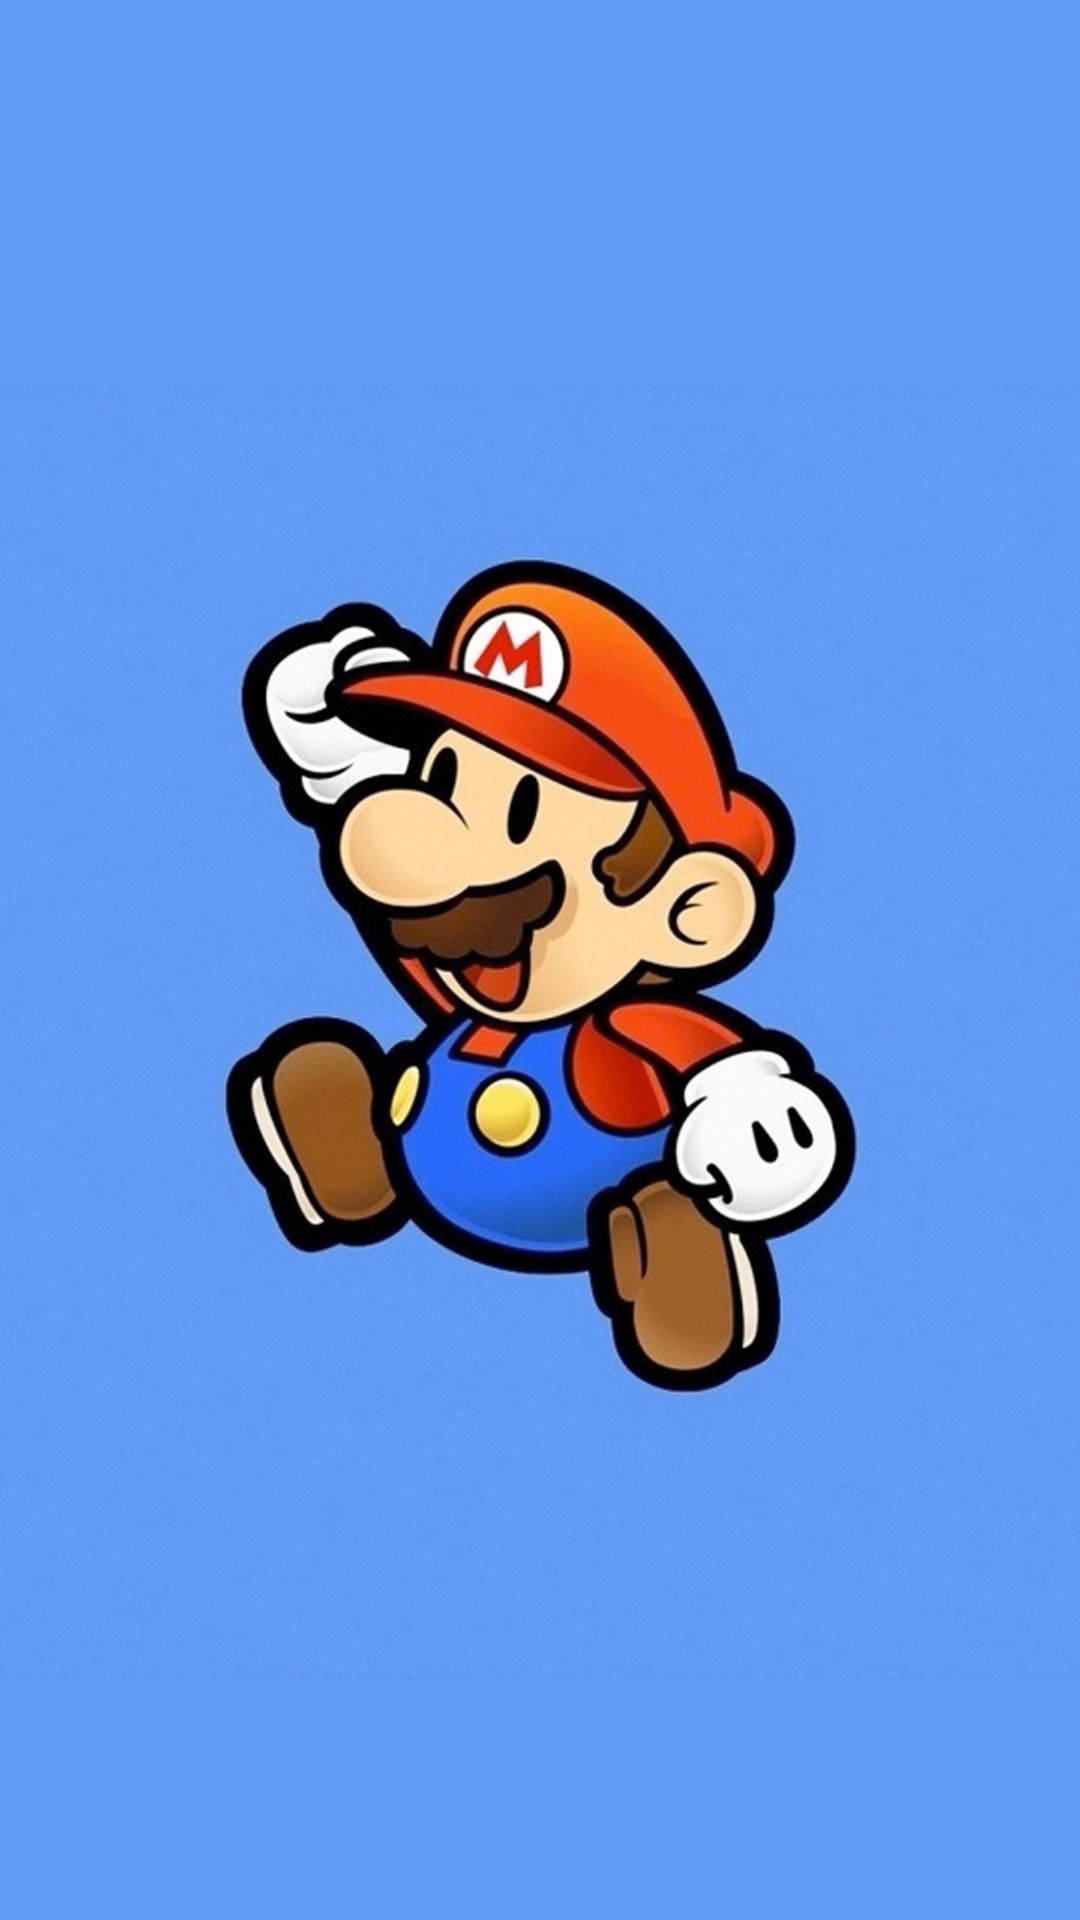 A Nintendo Mario Character Is Running On A Blue Background Background